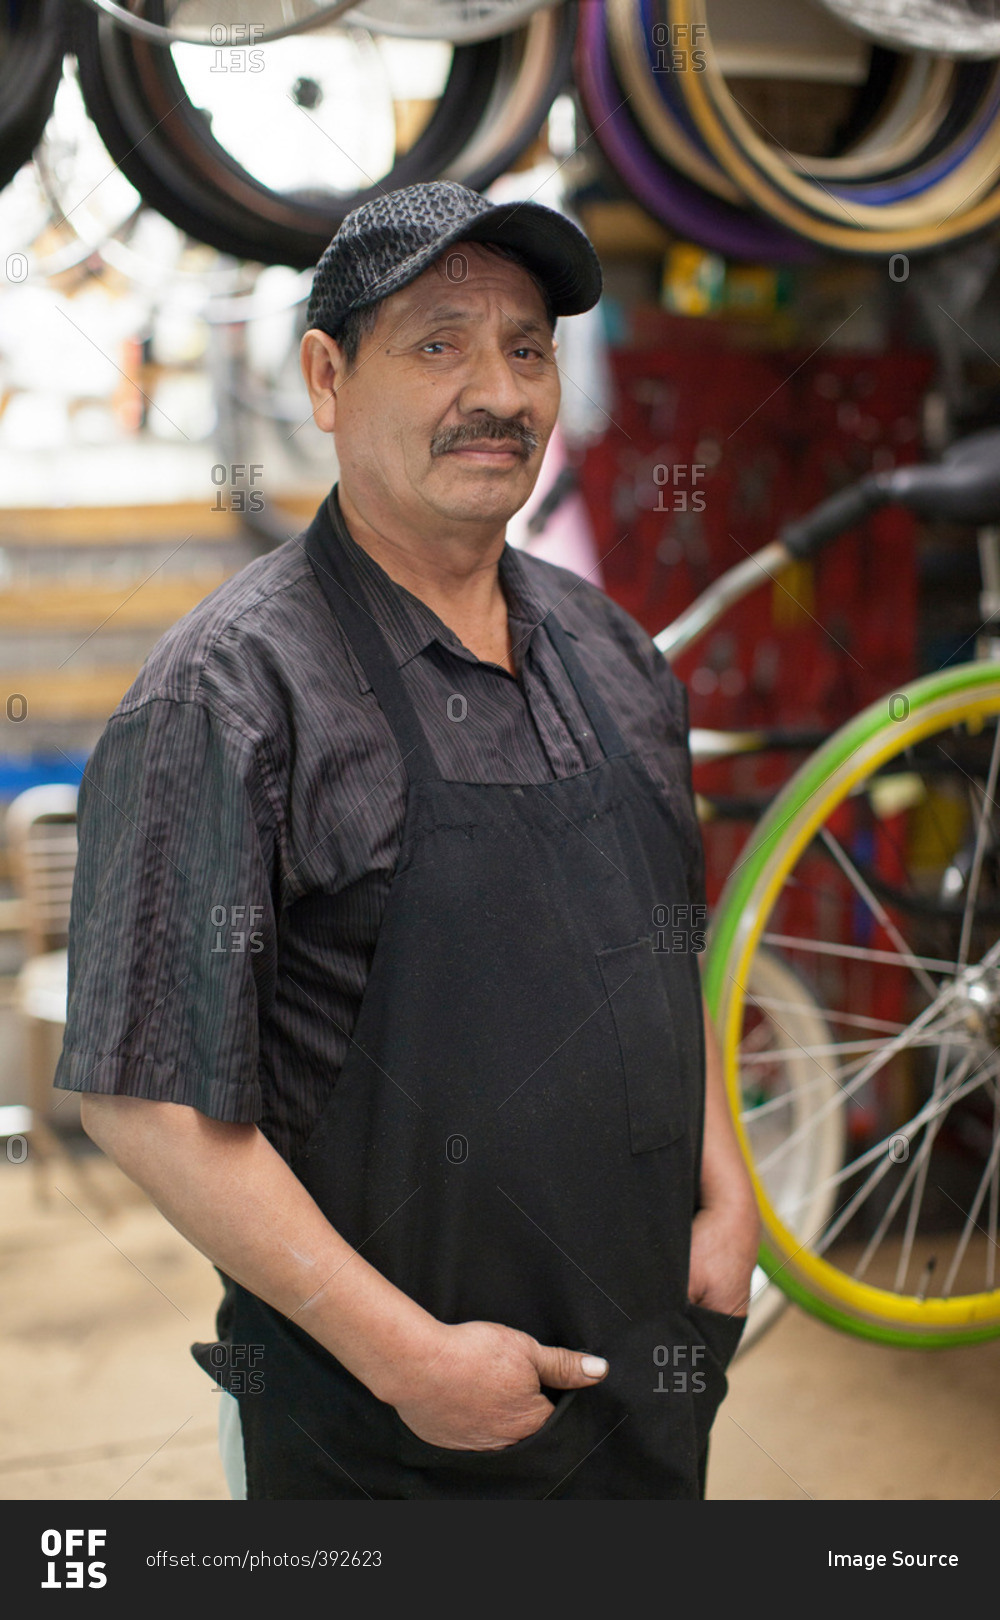 Mechanic standing in bicycle shop